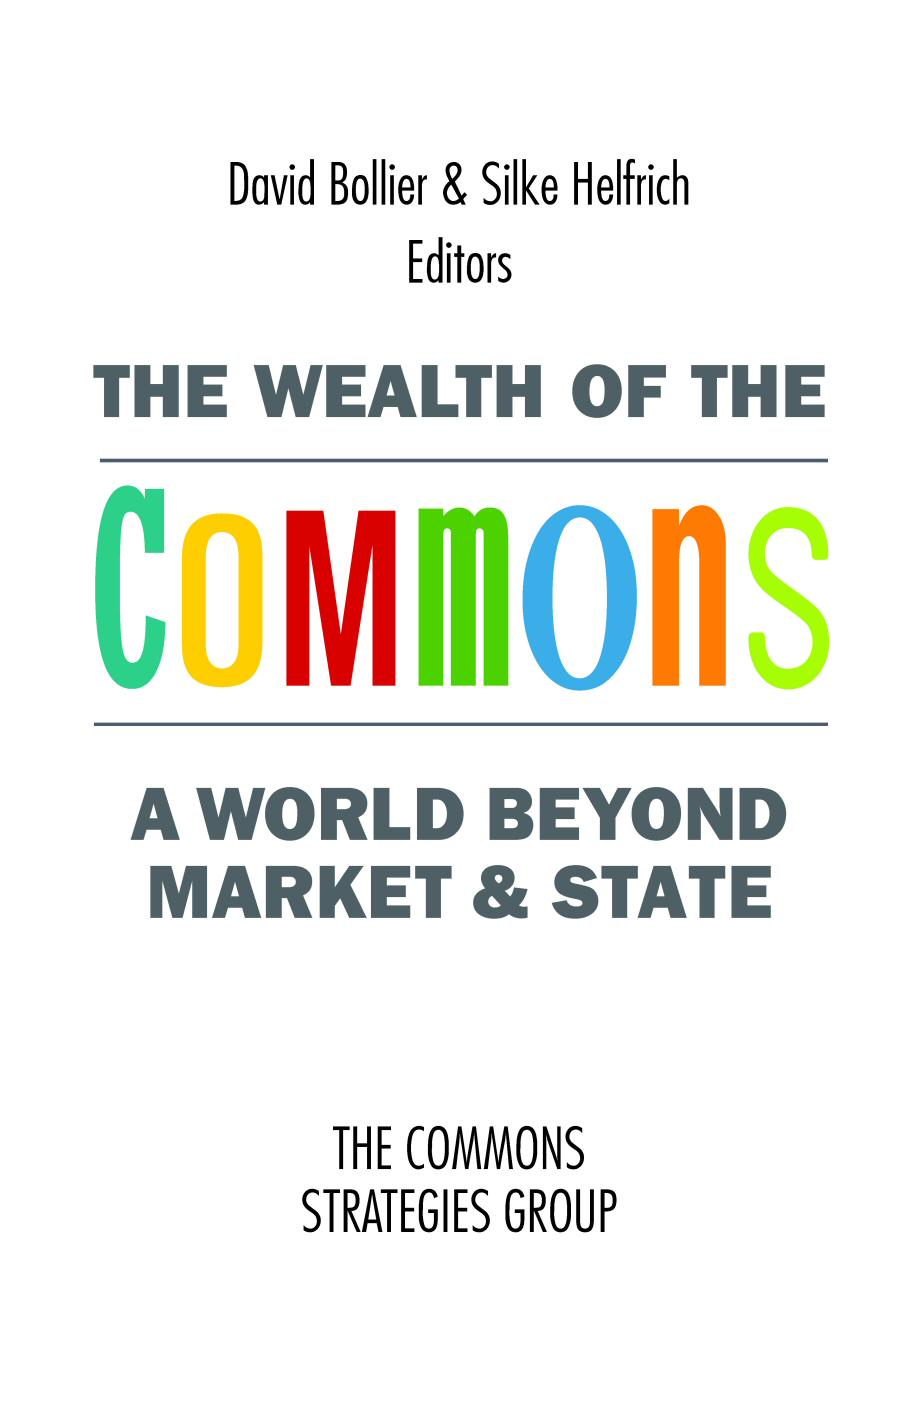 wealth_of_commons_cover2smaller